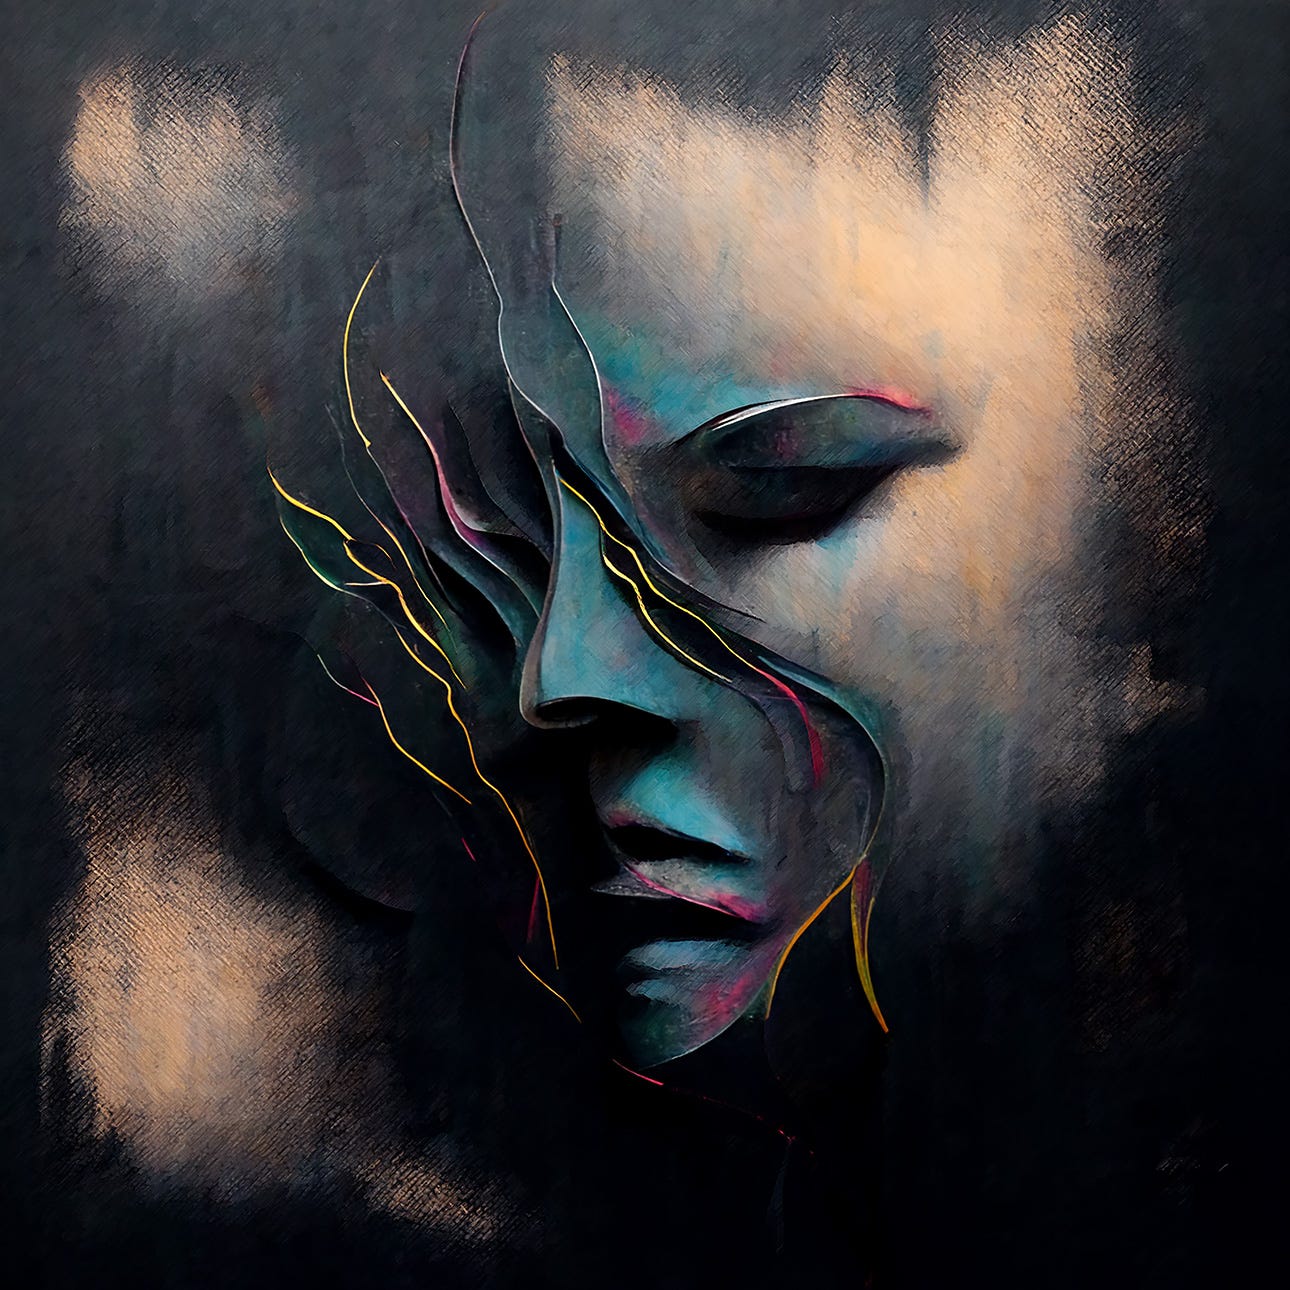 Emergence: an AI-generated, human-modified image of a face emerging from the shallows of darkness, connected to roots. MJ prompt: a dark grey canvas, multi-color metallic powder, rising to form a subtle outline of a face in pain, abstract